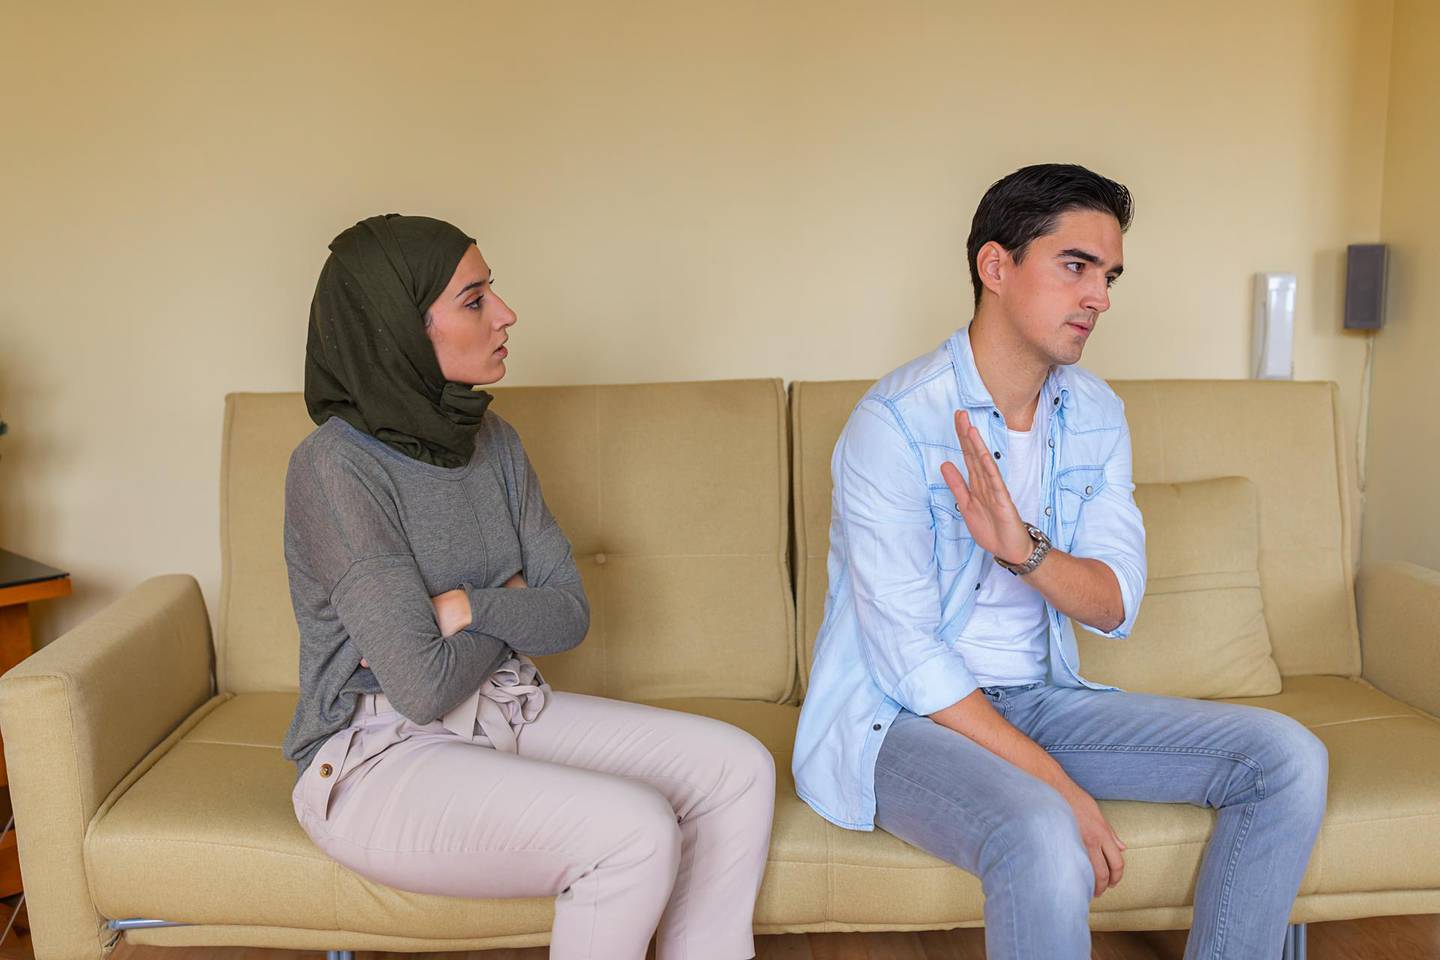 Young Muslim Woman is Having a Serious Discussion with her Boyfriend at Home While He is Ignoring her. Getty Images